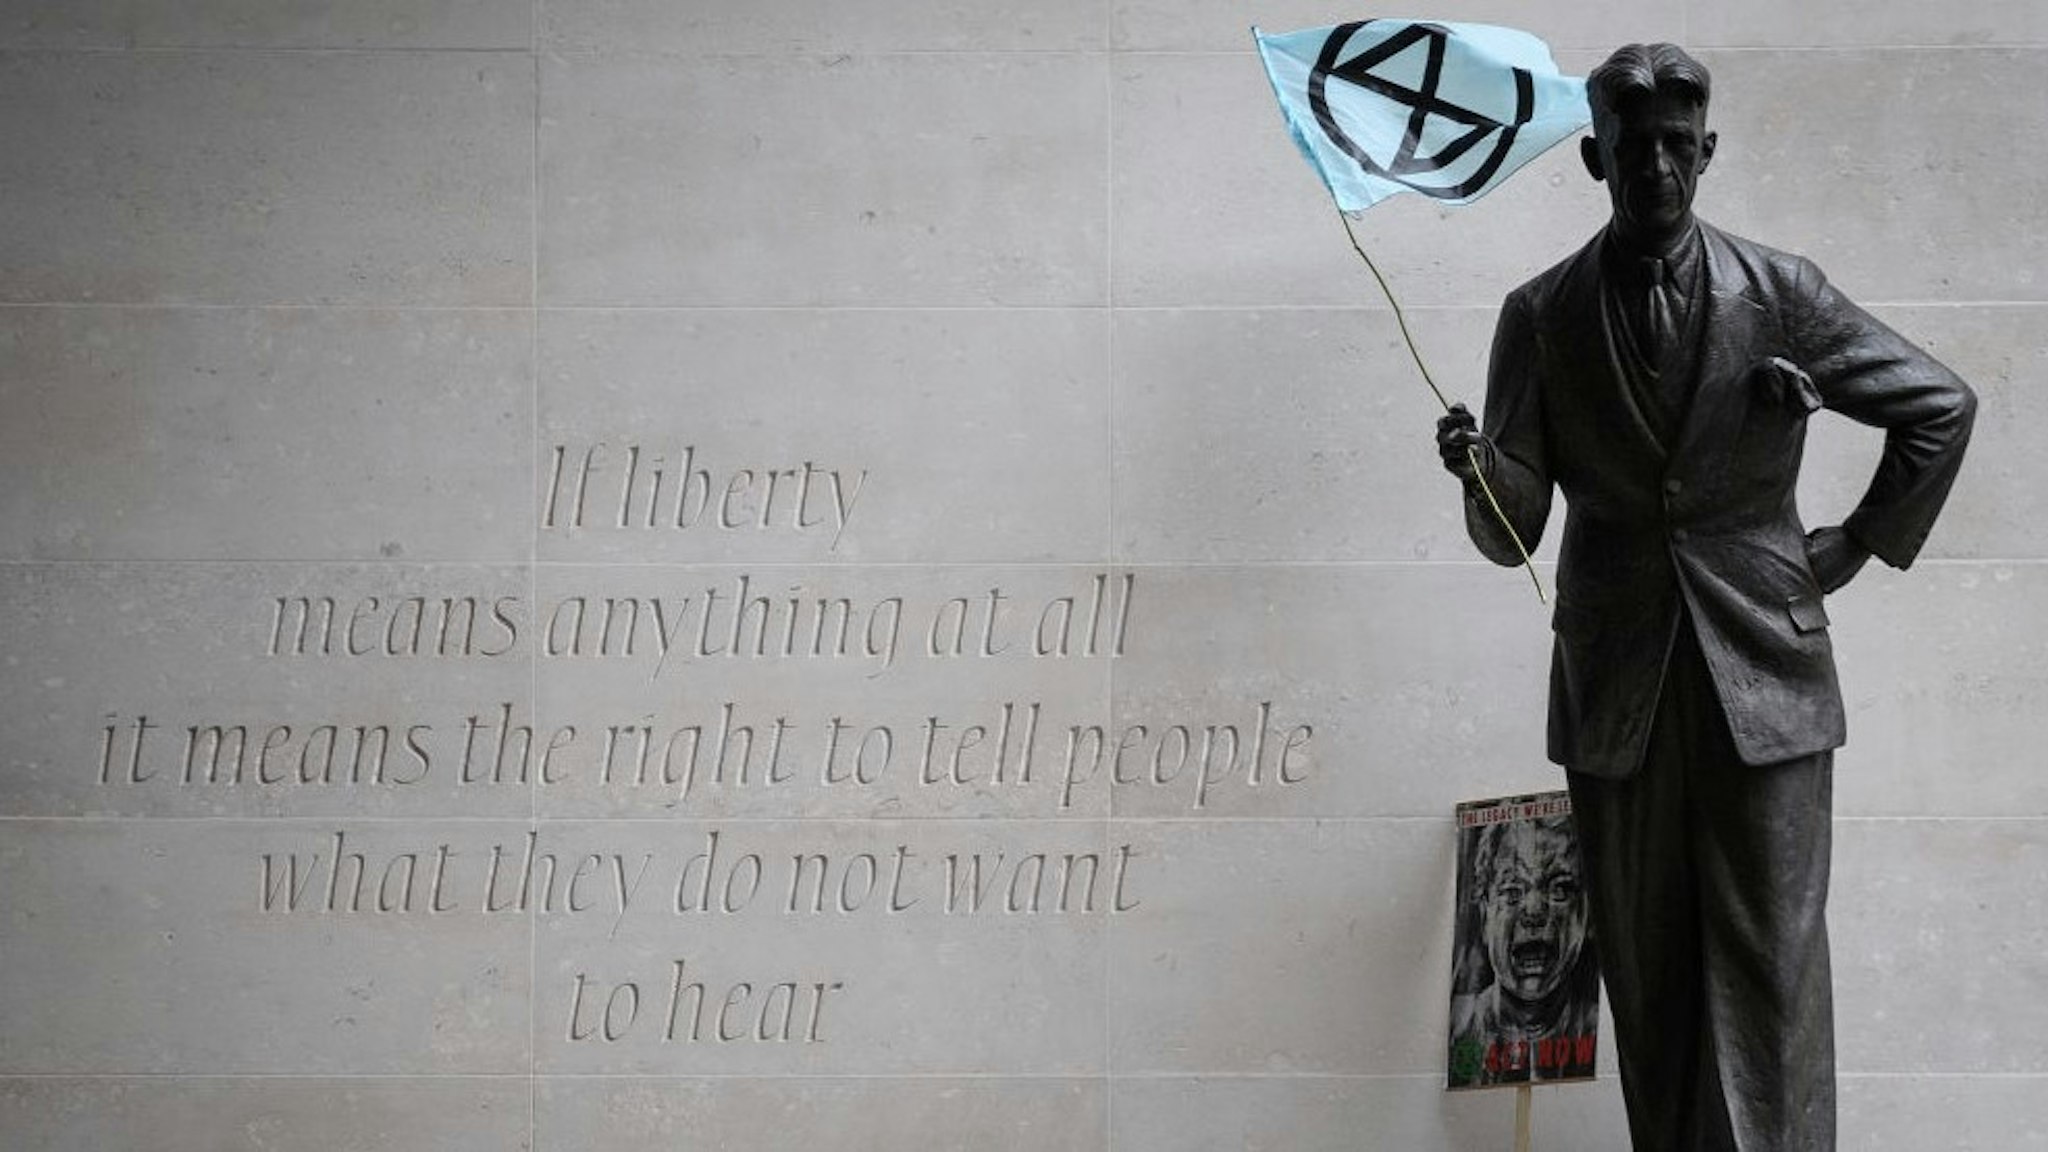 LONDON, ENGLAND - OCTOBER 11: An Extinction Rebellion flag is seen in the hands of a statue of author George Orwell outside the headquarters of the BBC as the environmental group protests about the broadcaster's alleged silence over climate issues on October 11, 2019 in London, England. The Extinction Rebellion group is in the middle of a string of protests across the country, with the aim of highlighting the urgency to address climate change as an ongoing emergency. (Photo by